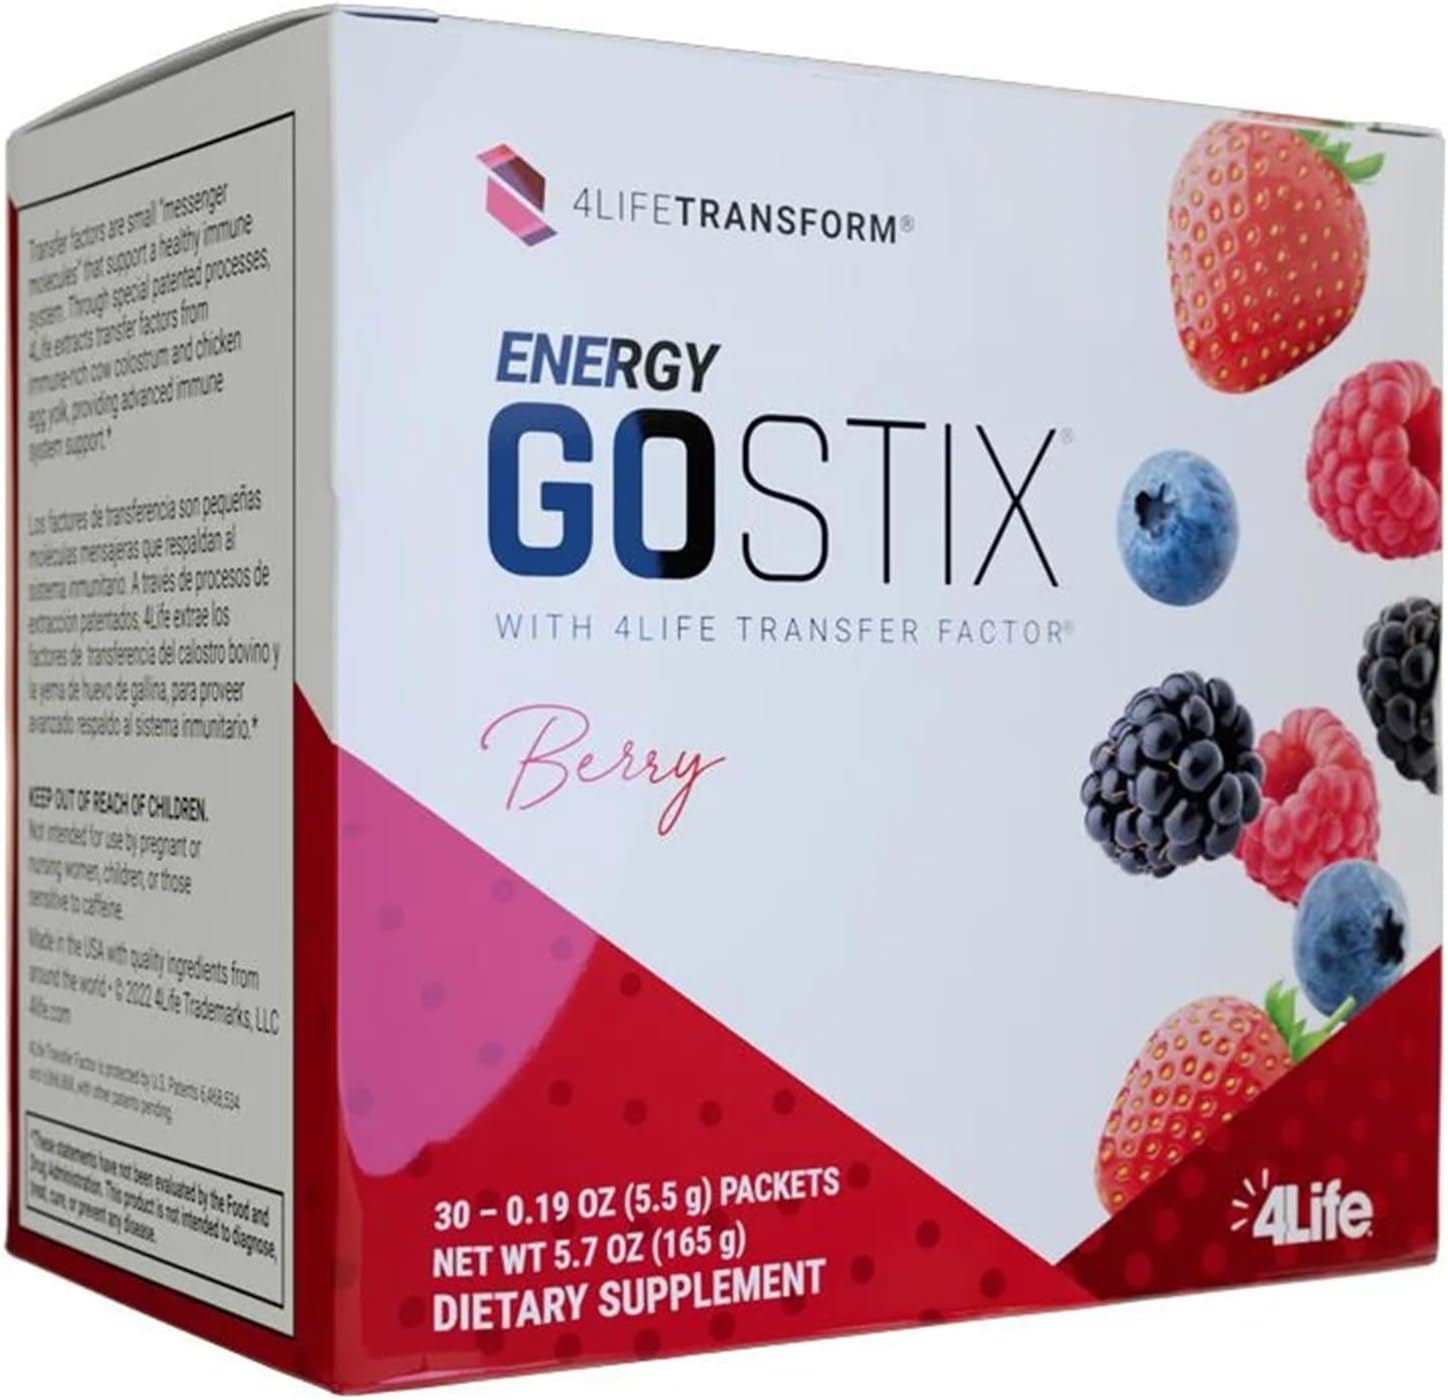 4Life Energy Go Stix - Healthy Energy Source - Berry Drink Mix - Contains Natural Caffeine from Guarana, Maca, Yerba Mate, and Green Tea Leaf Extract - 30 Packets